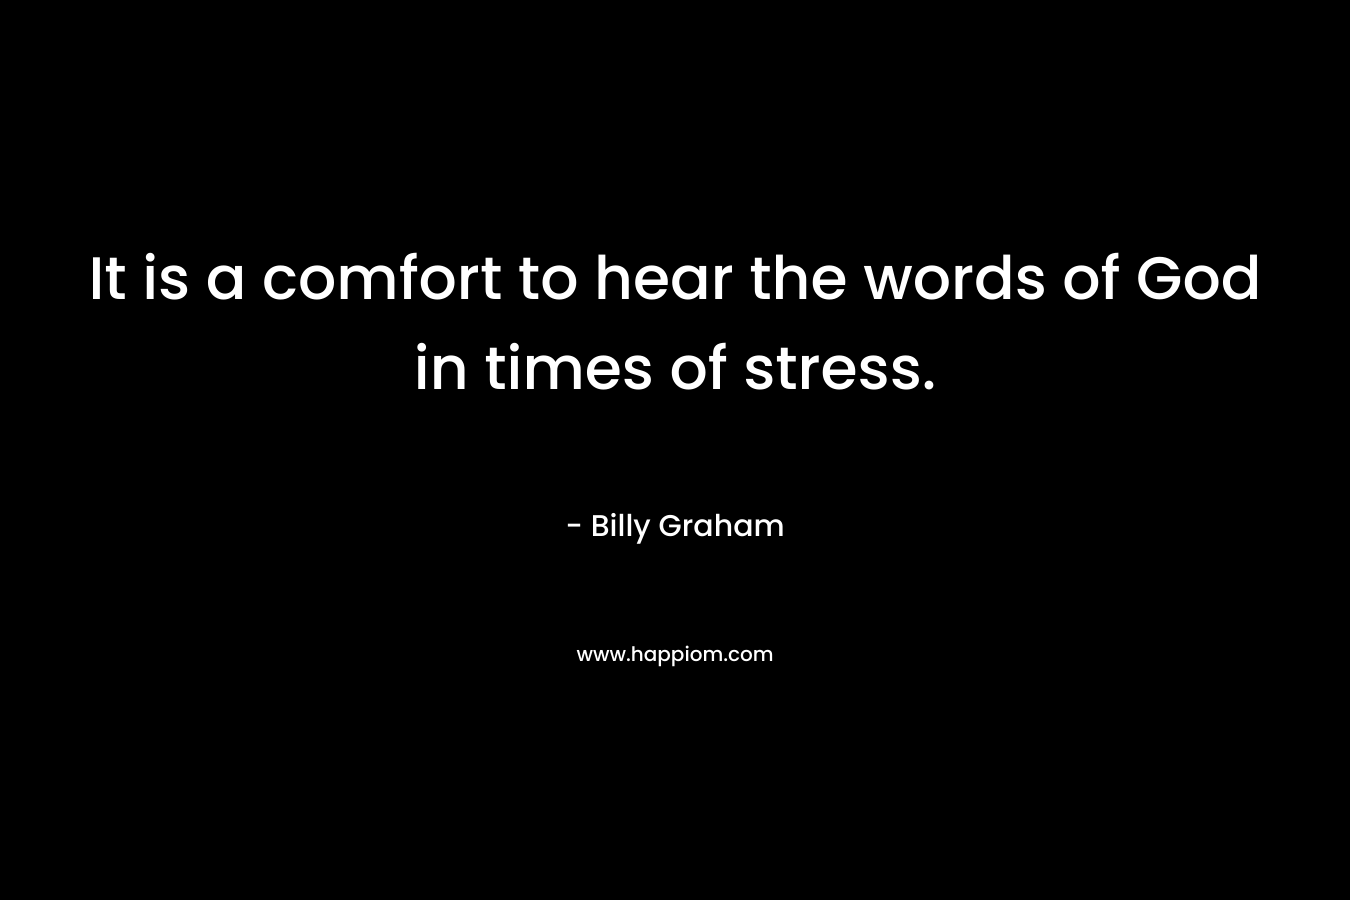 It is a comfort to hear the words of God in times of stress.